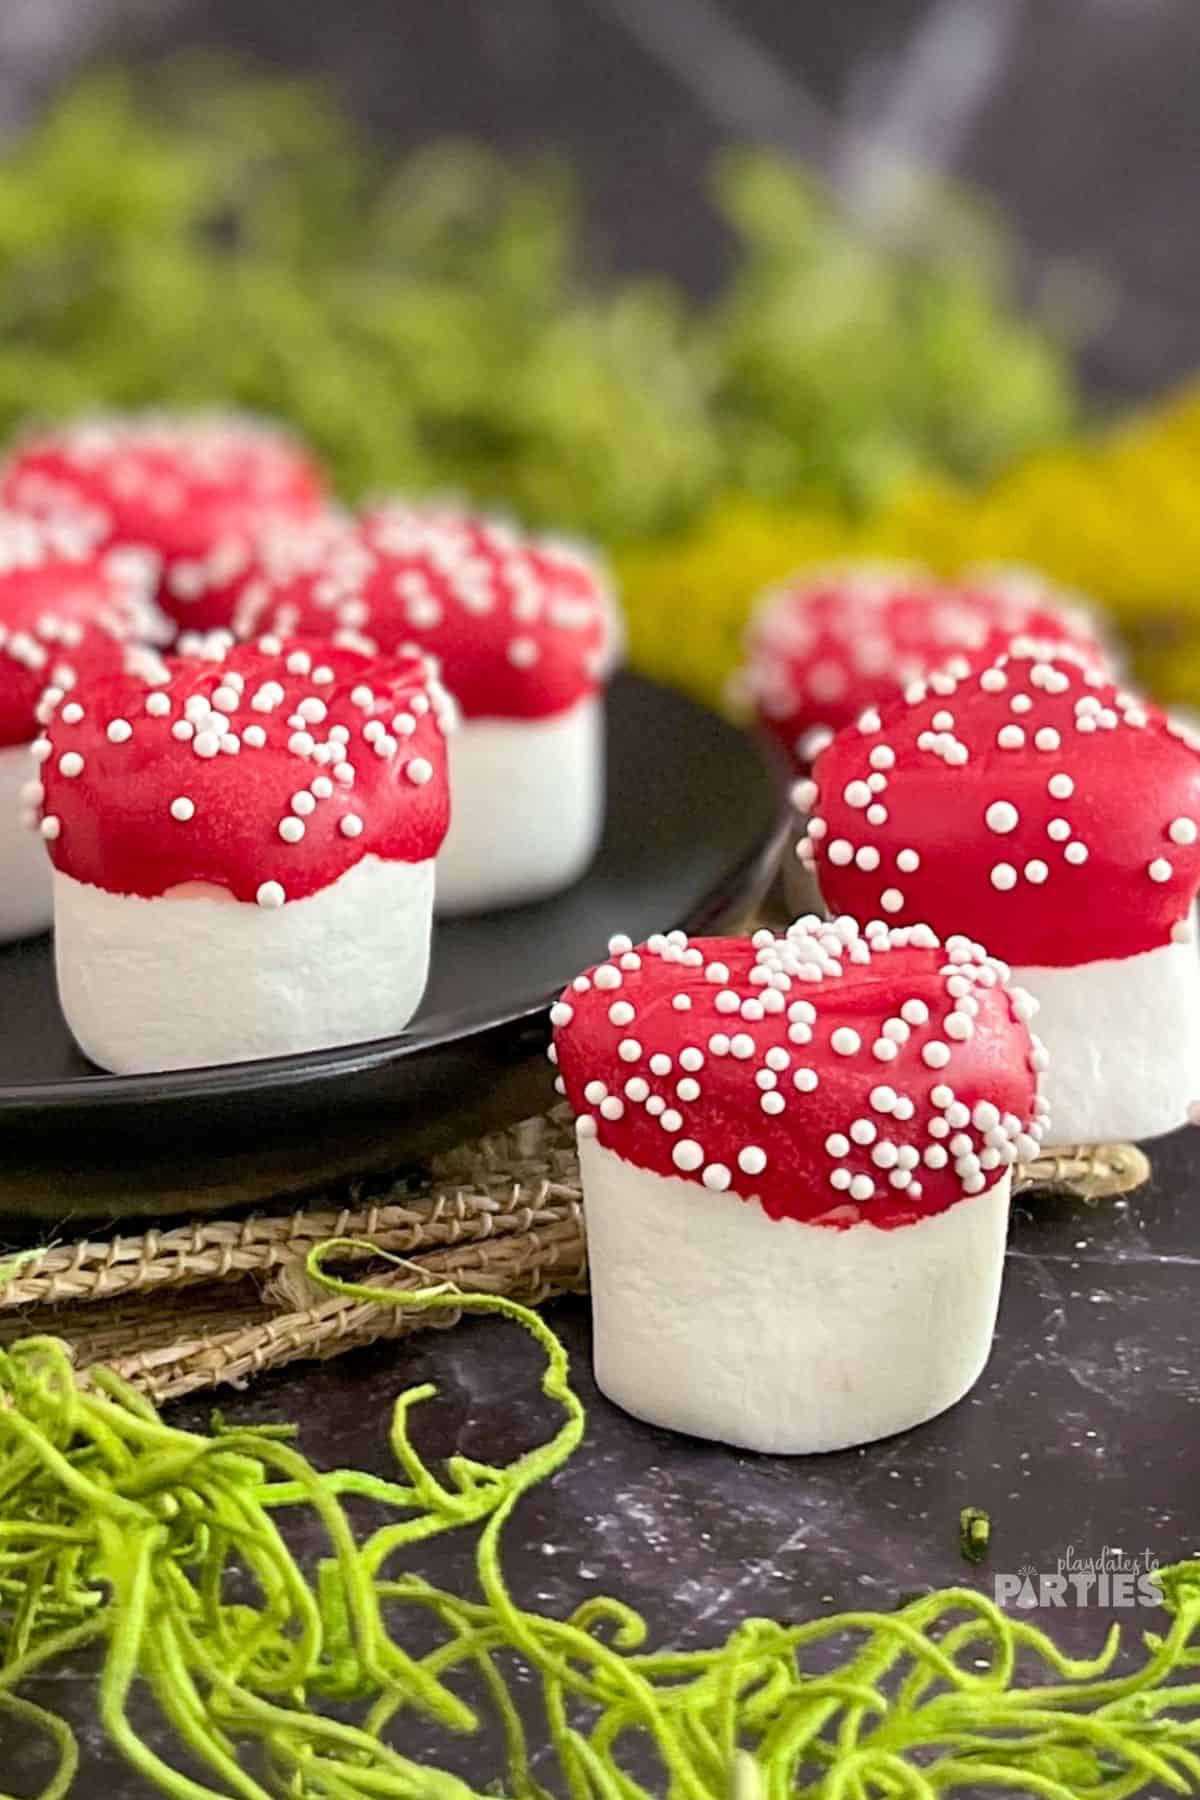 A cute edible toadstool for a party snack.